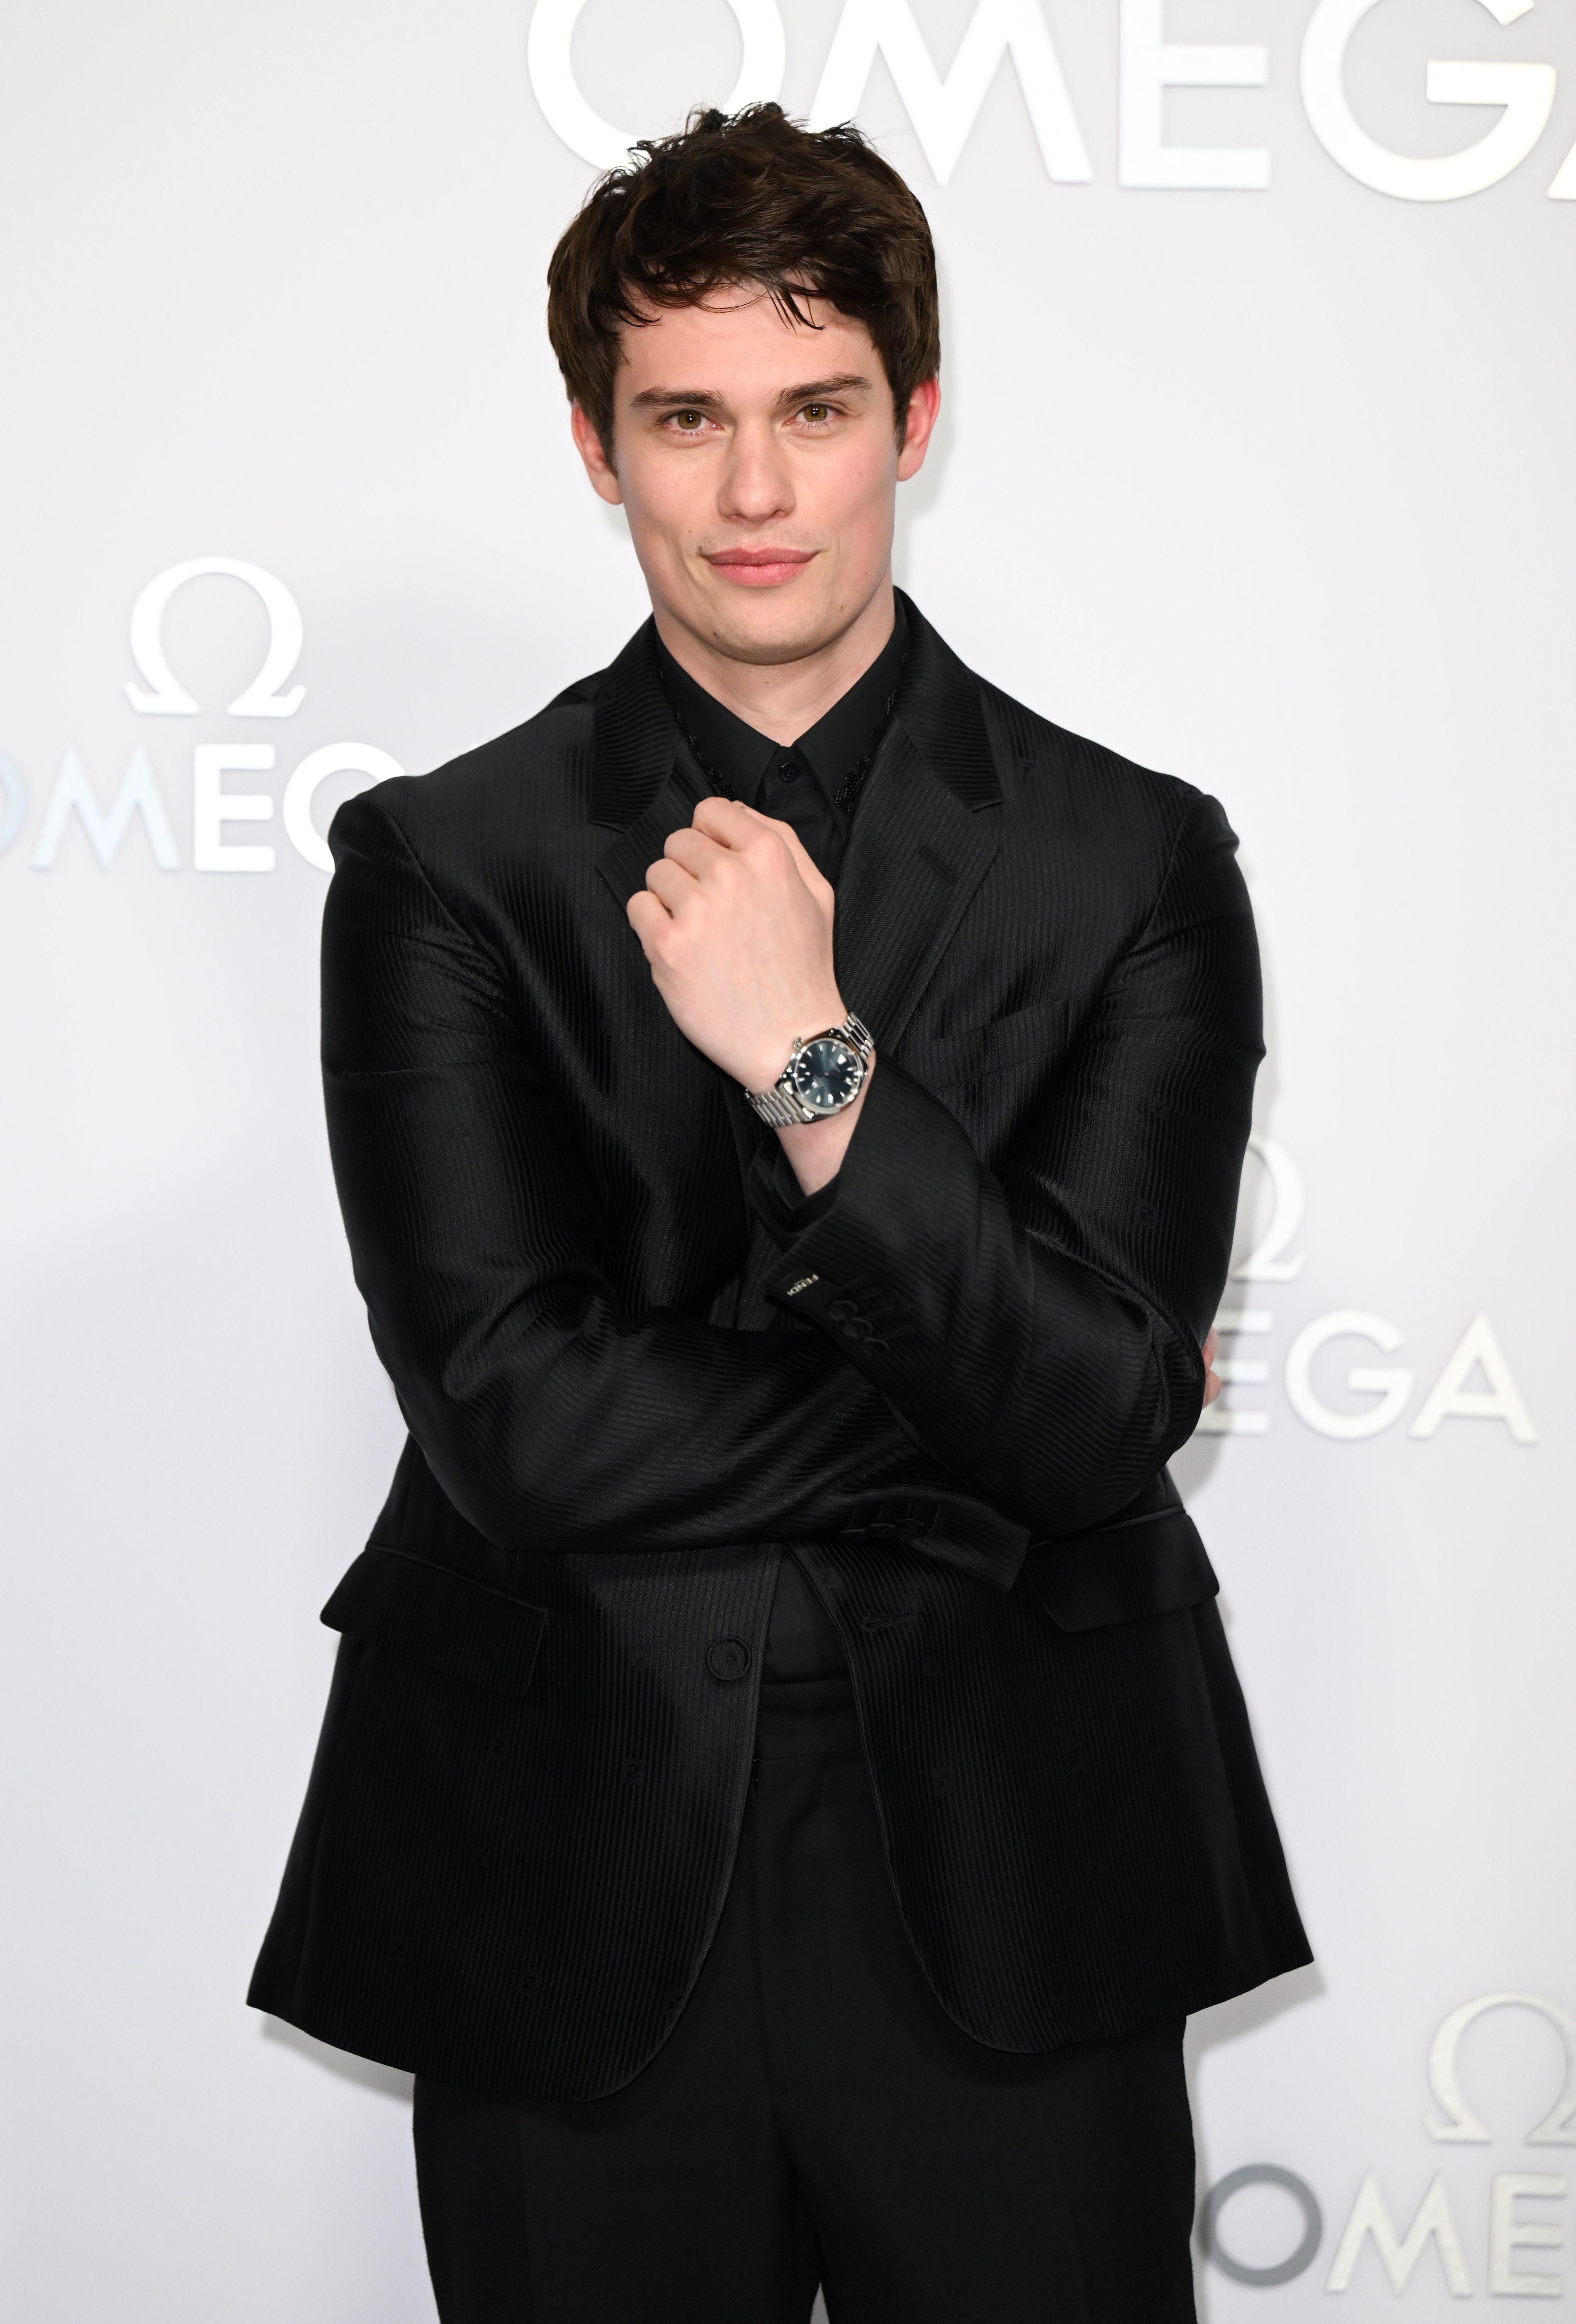 Nicholas Galitzine at the Omega Aqua Terra Shades International Launch Event on March 22, 2023, in London, England. | Source: Getty Images